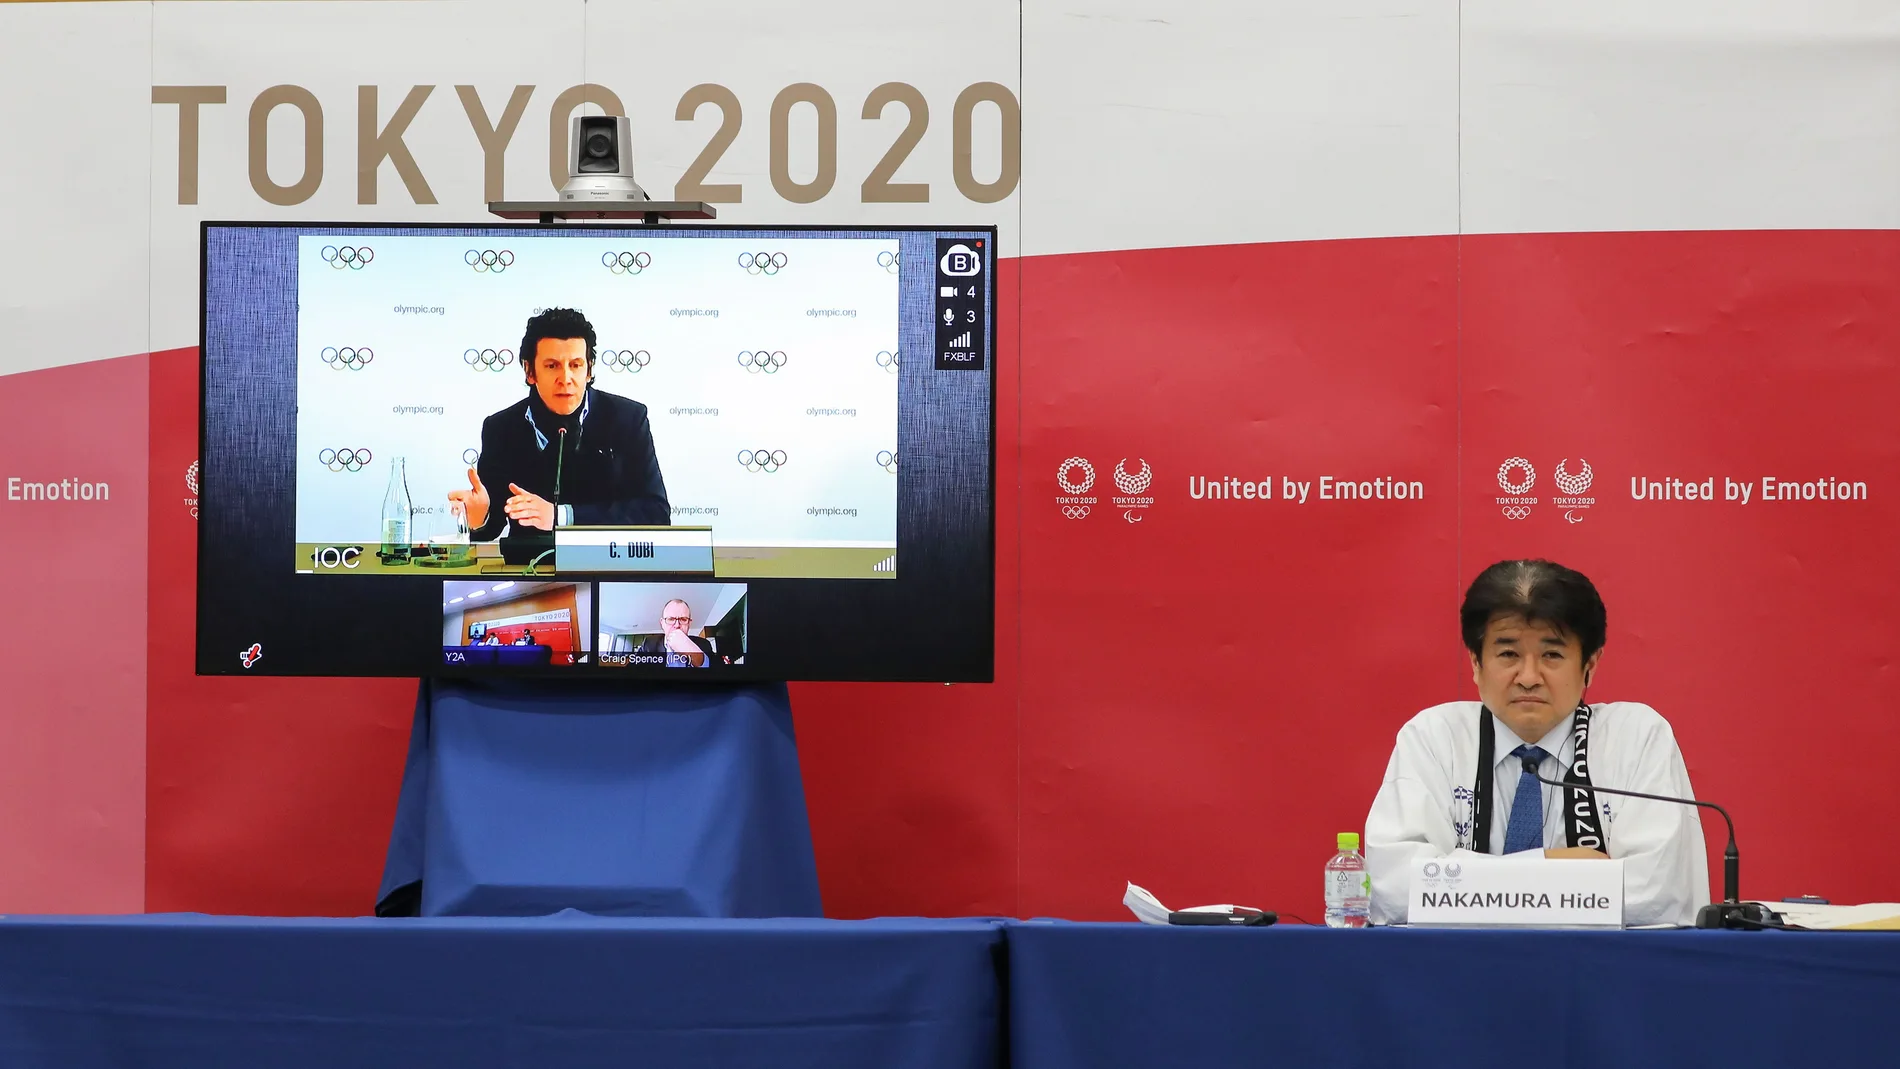 Tokyo (Japan), 17/02/2021.- Christophe Dubi (on the screen), Olympic Games Executive Director, speaks remotely during the International Olympic Committee (IOC), the International Paralympic Committee (IPC) and the Tokyo Organising Committee of the Olympic & Paralympic Games (Tokyo 2020) joint press briefing in Tokyo, Japan, 17 February 2021 (issued 22 February 2021). Tokyo 2020, IOC and IPC hosted a joint working meeting via teleconference focusing COVID-19 countermeasures during 15-17 this month. (Japón, Tokio) EFE/EPA/Du Xiaoyi / POOL